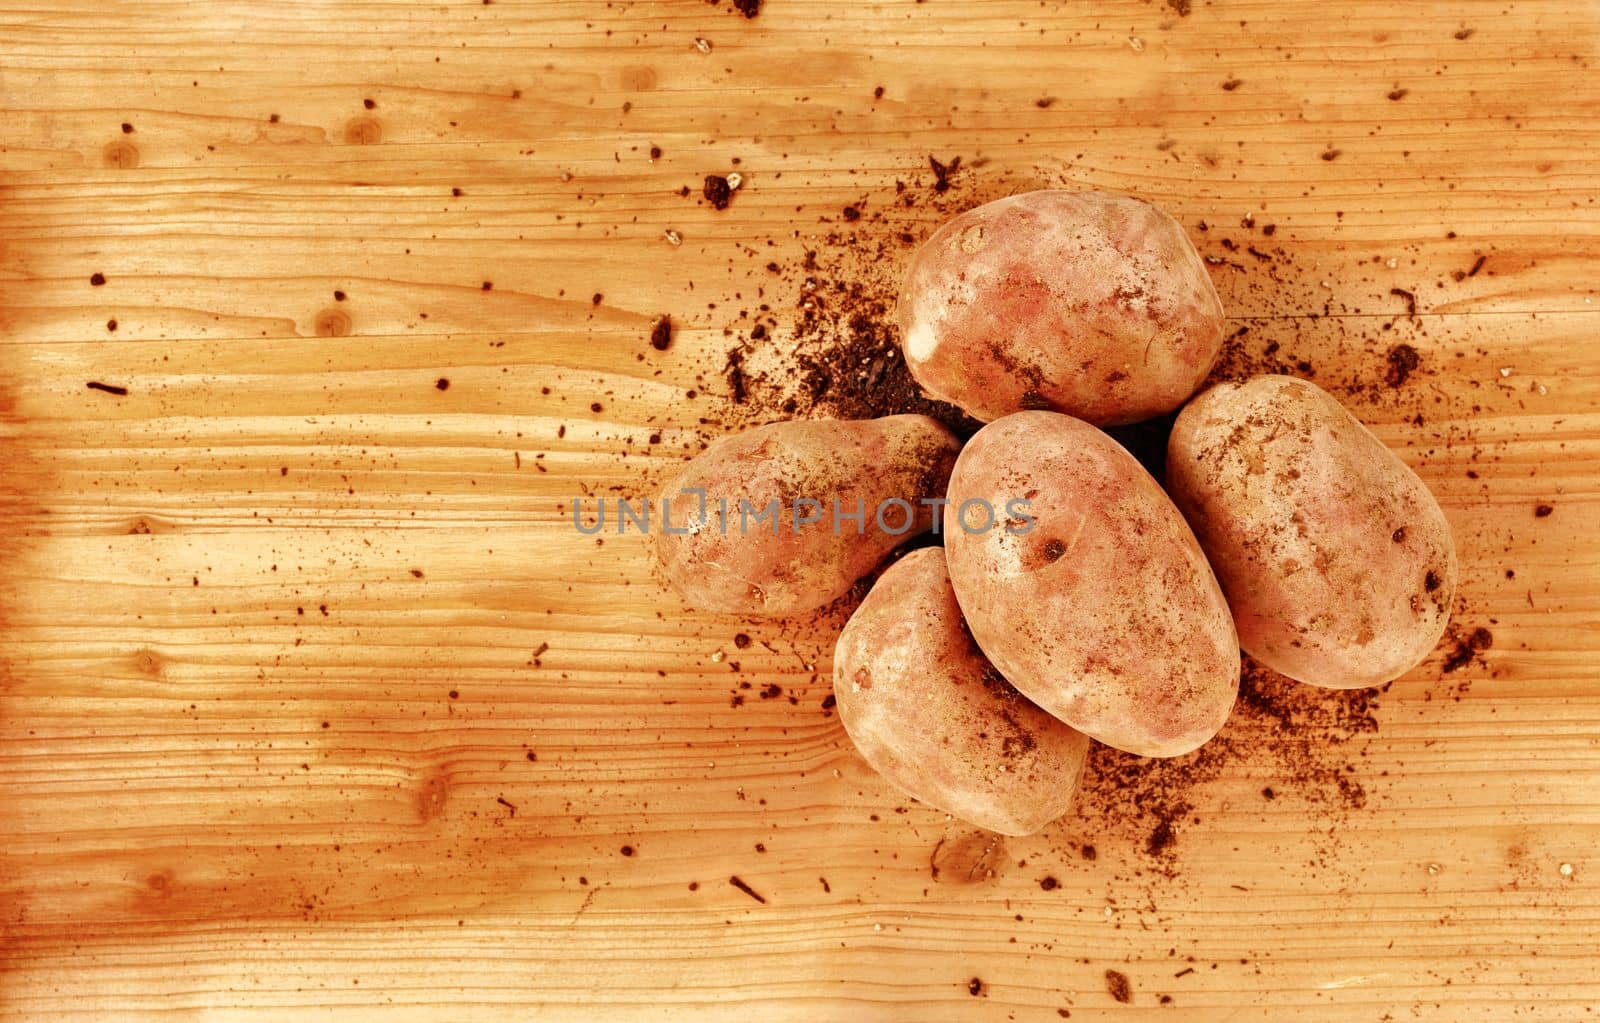 Harvested potatoes with soil on wooden table , vegetarian food